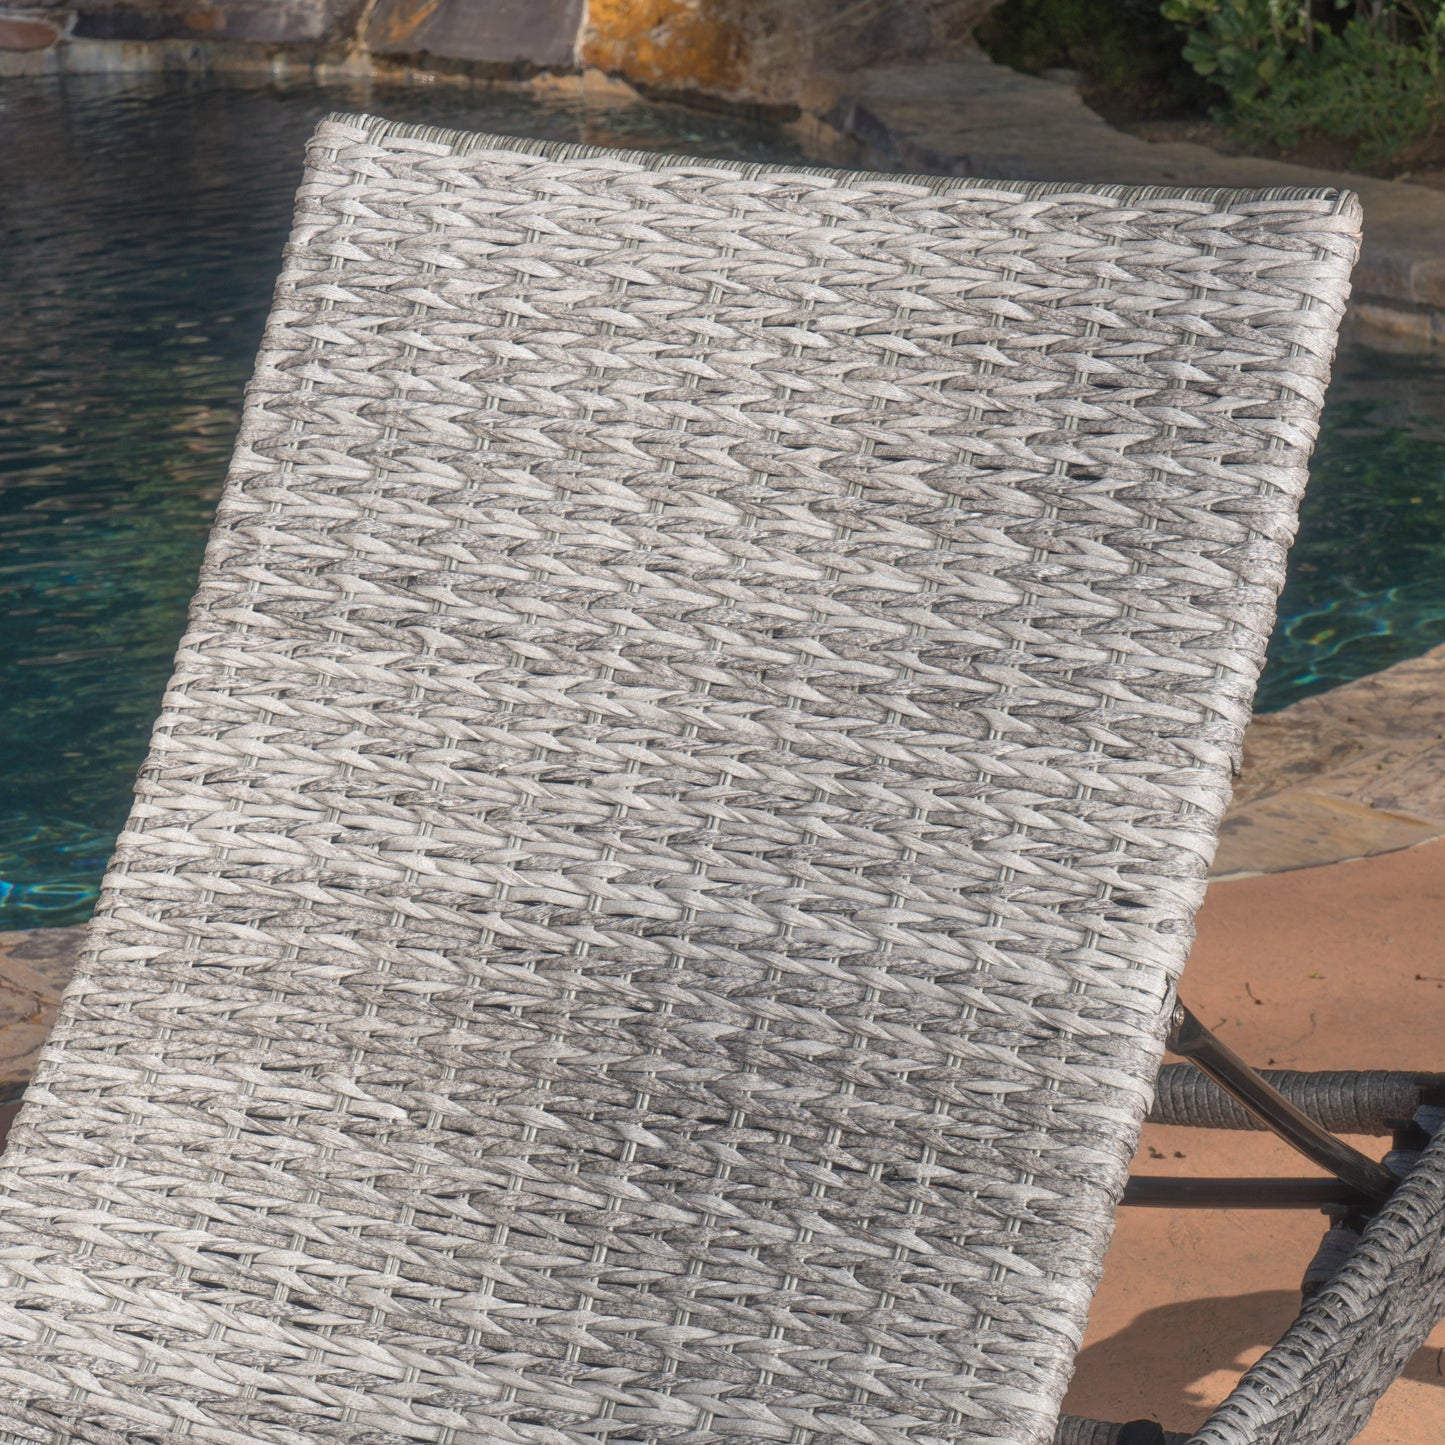 Isle Of Palms Outdoor Grey Wicker Adjustable Back Chaise Lounges